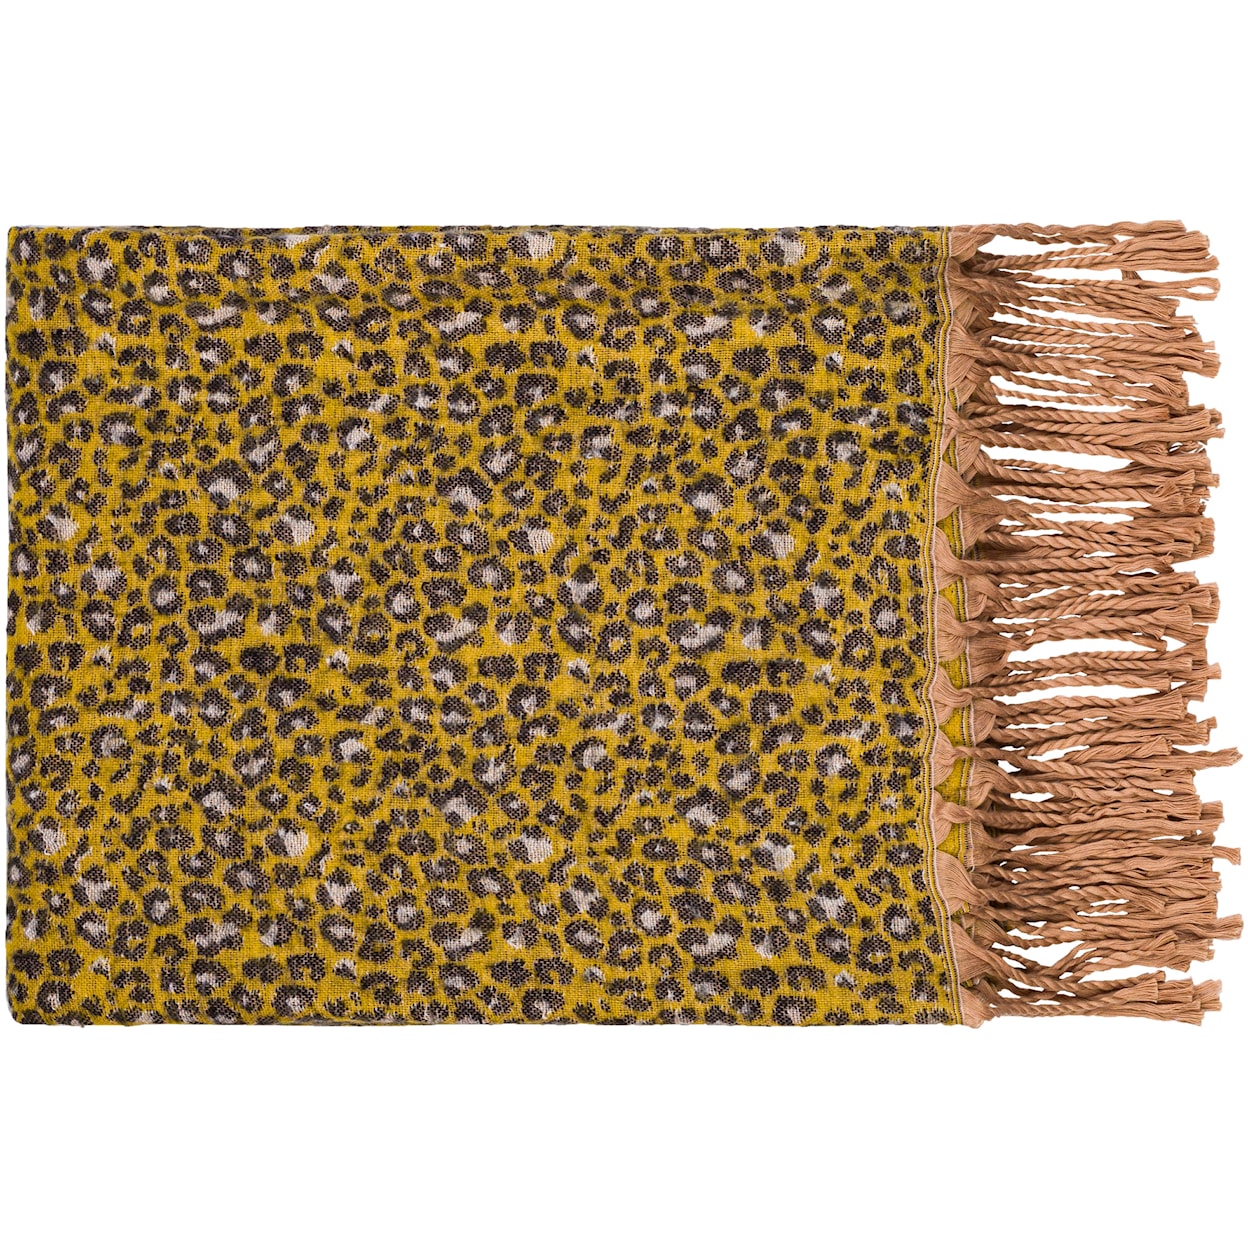 Surya Rugs Jacquie Miscellaneous Accessories